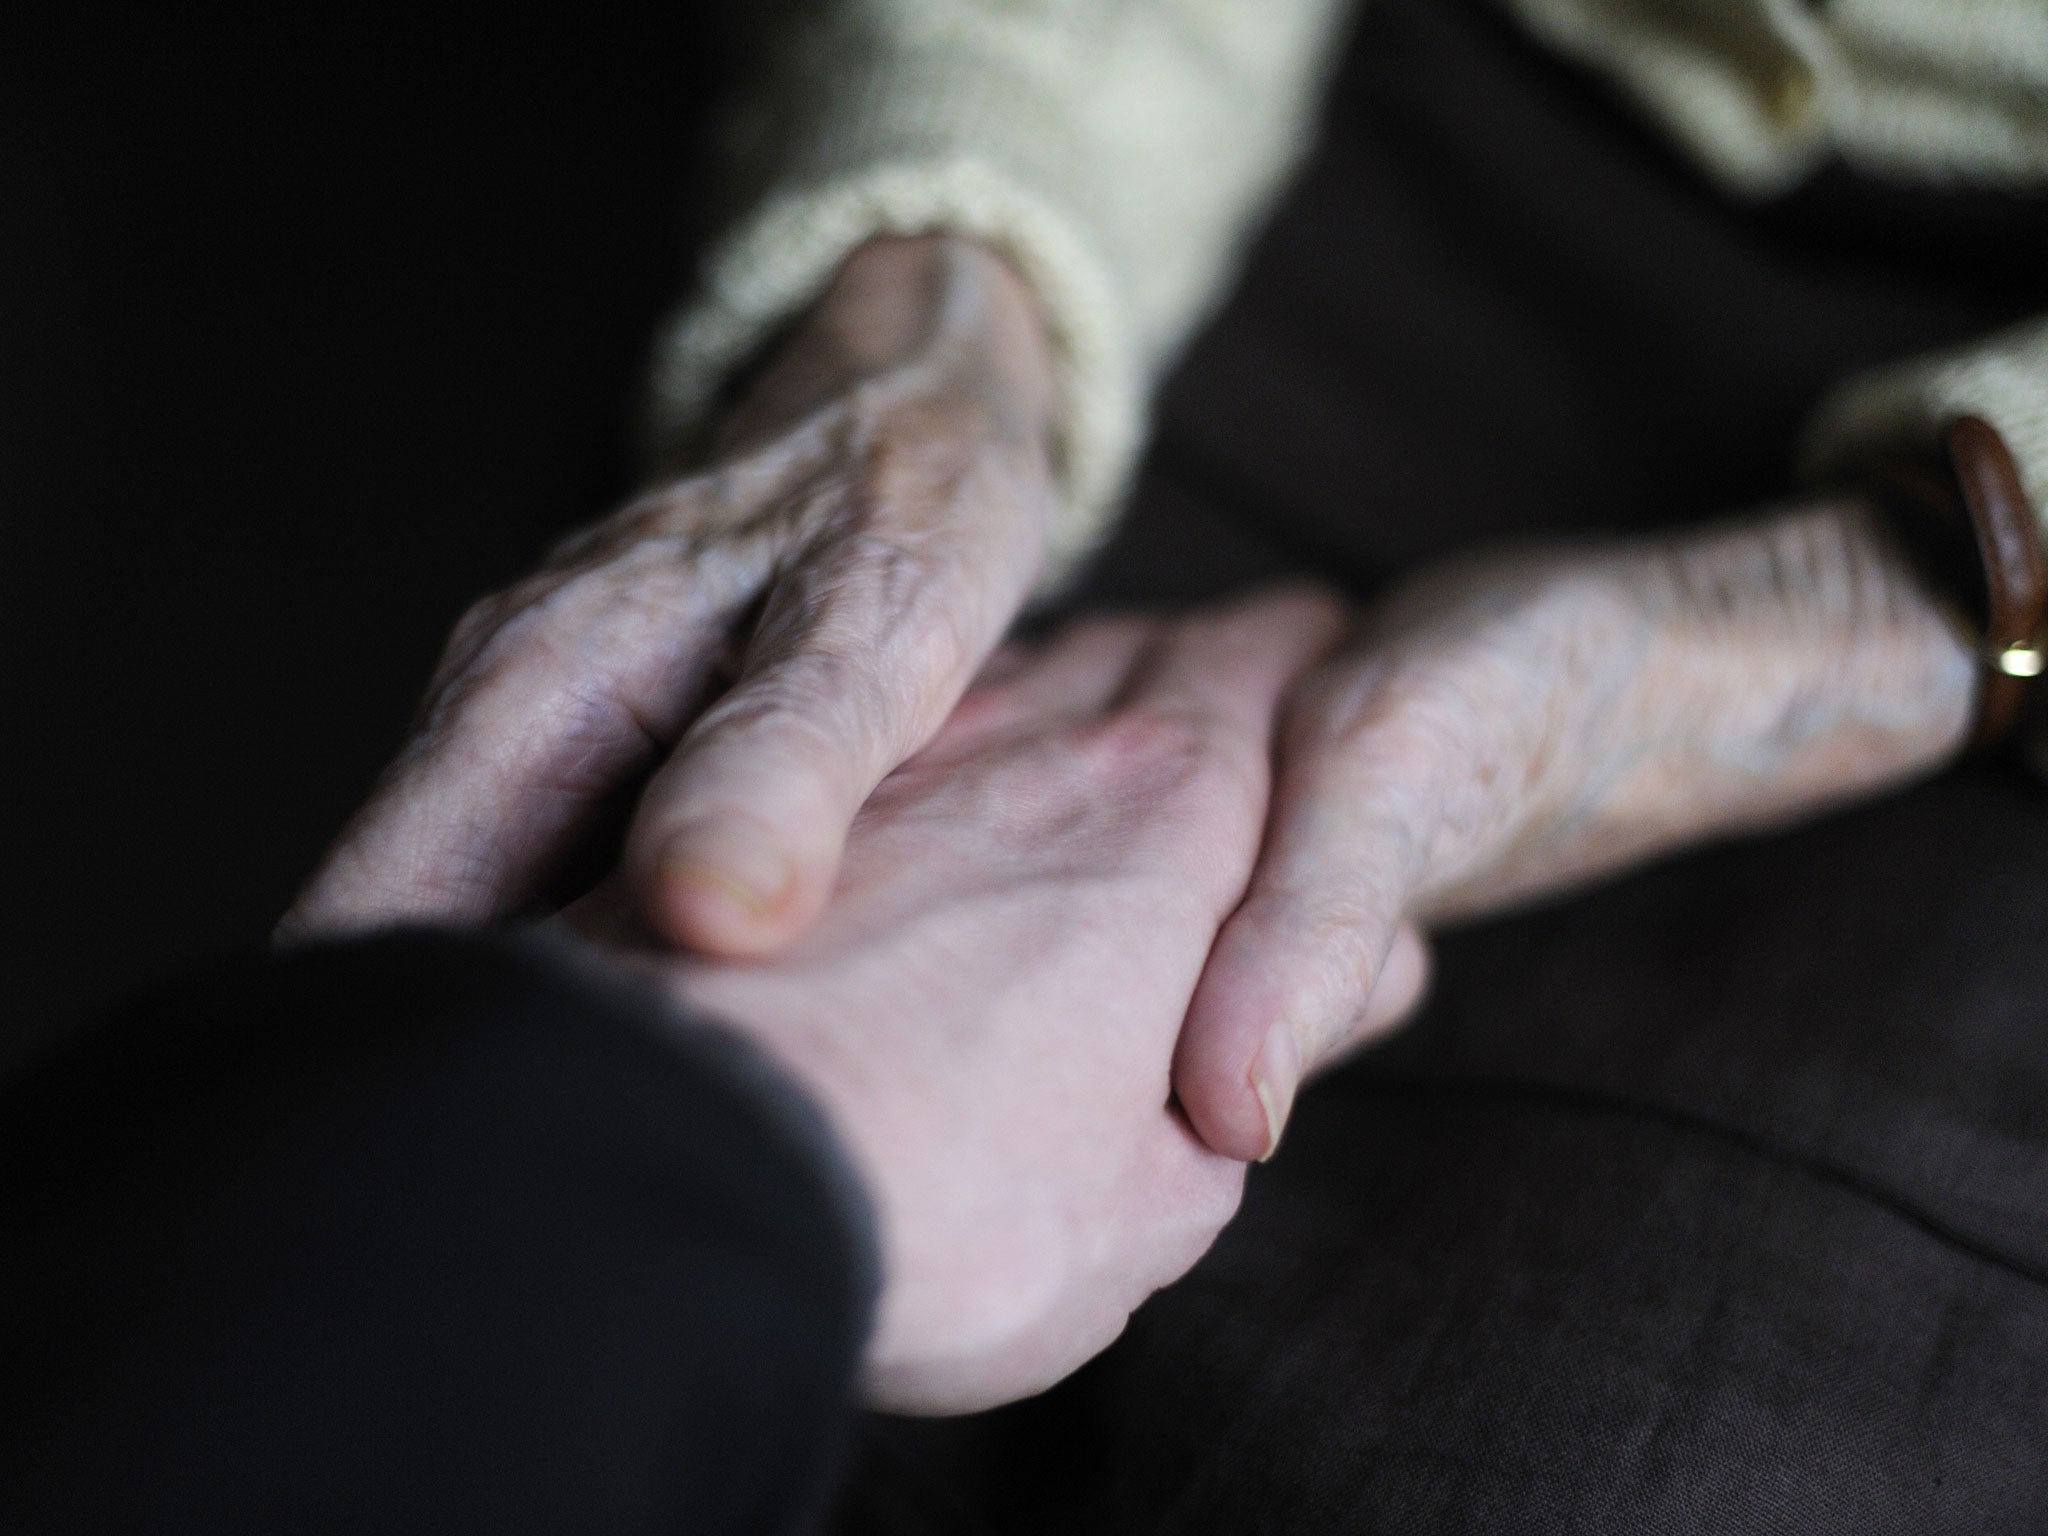 Dementia affected close to 50 million people worldwide